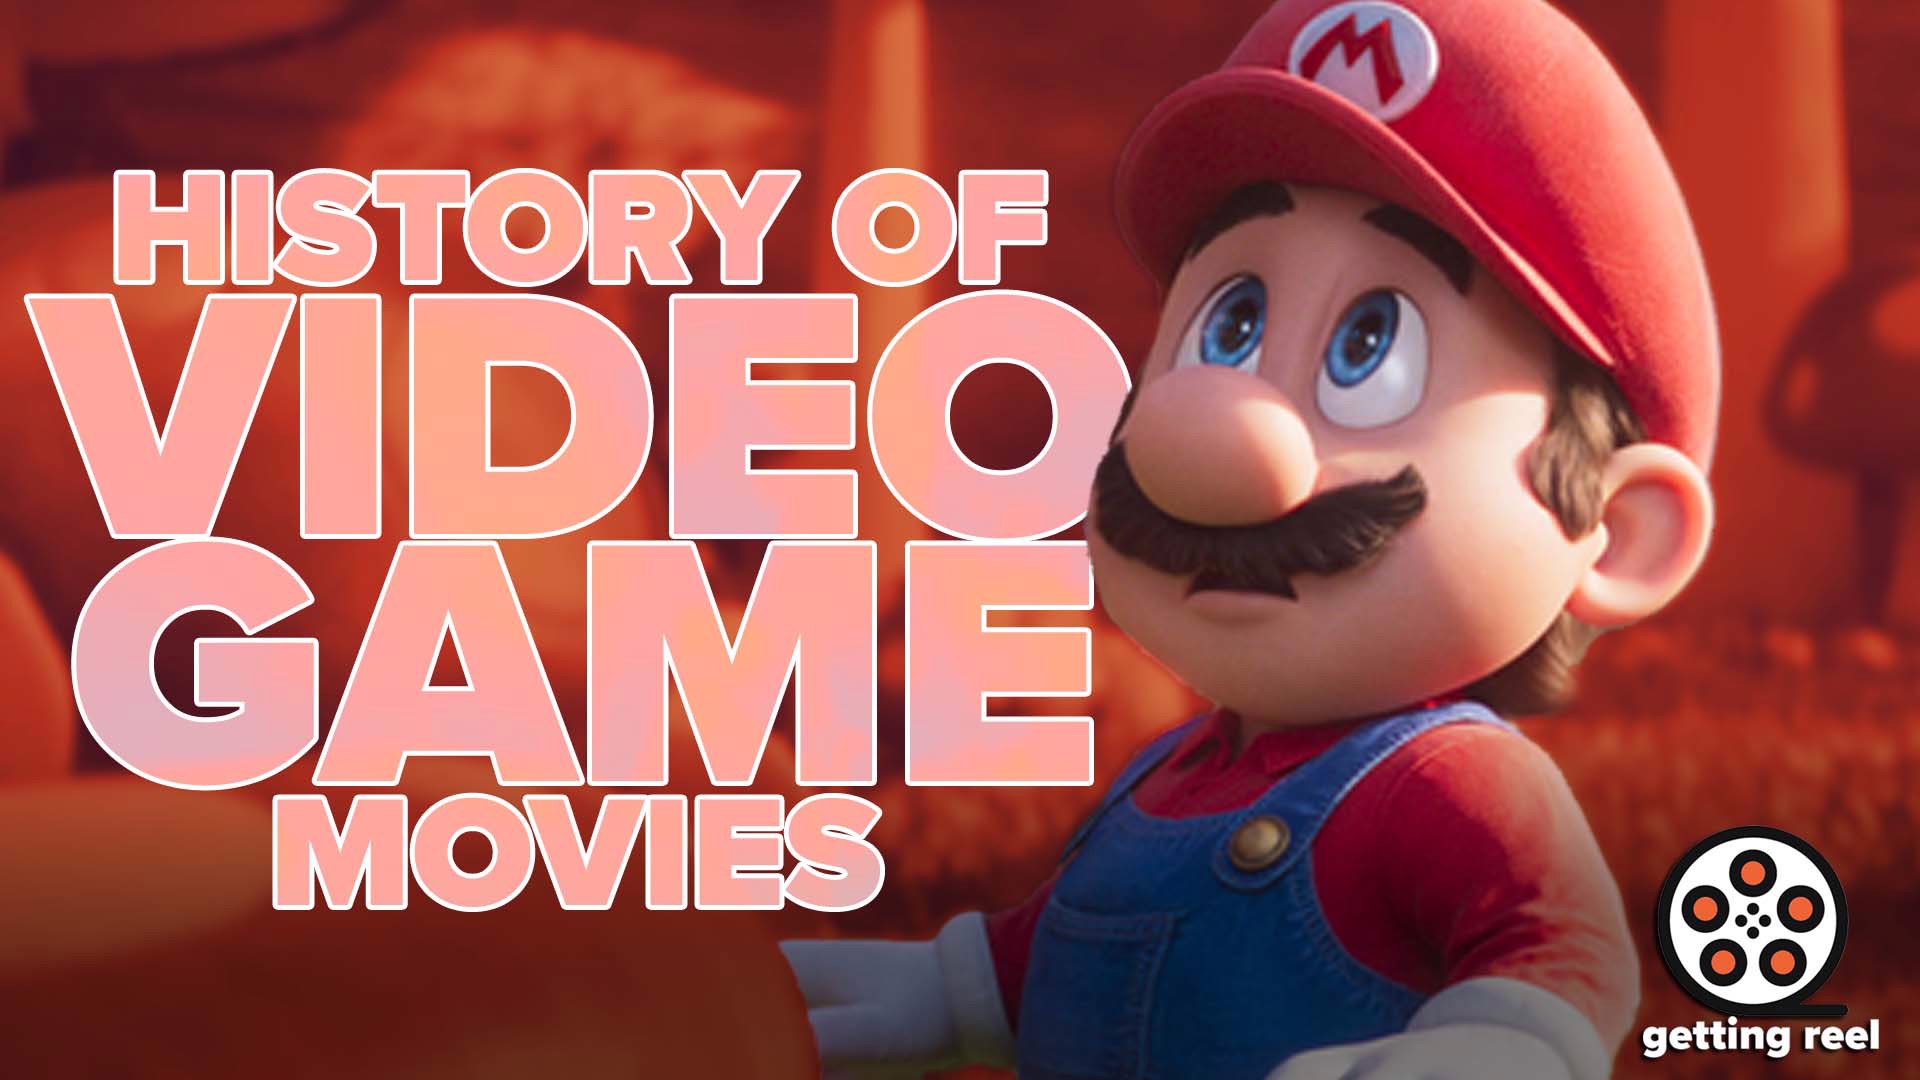 From the original Mario Bros. movie to Uncharted, we look at the lows and rare highs in the attempts to adapt video games into movies.